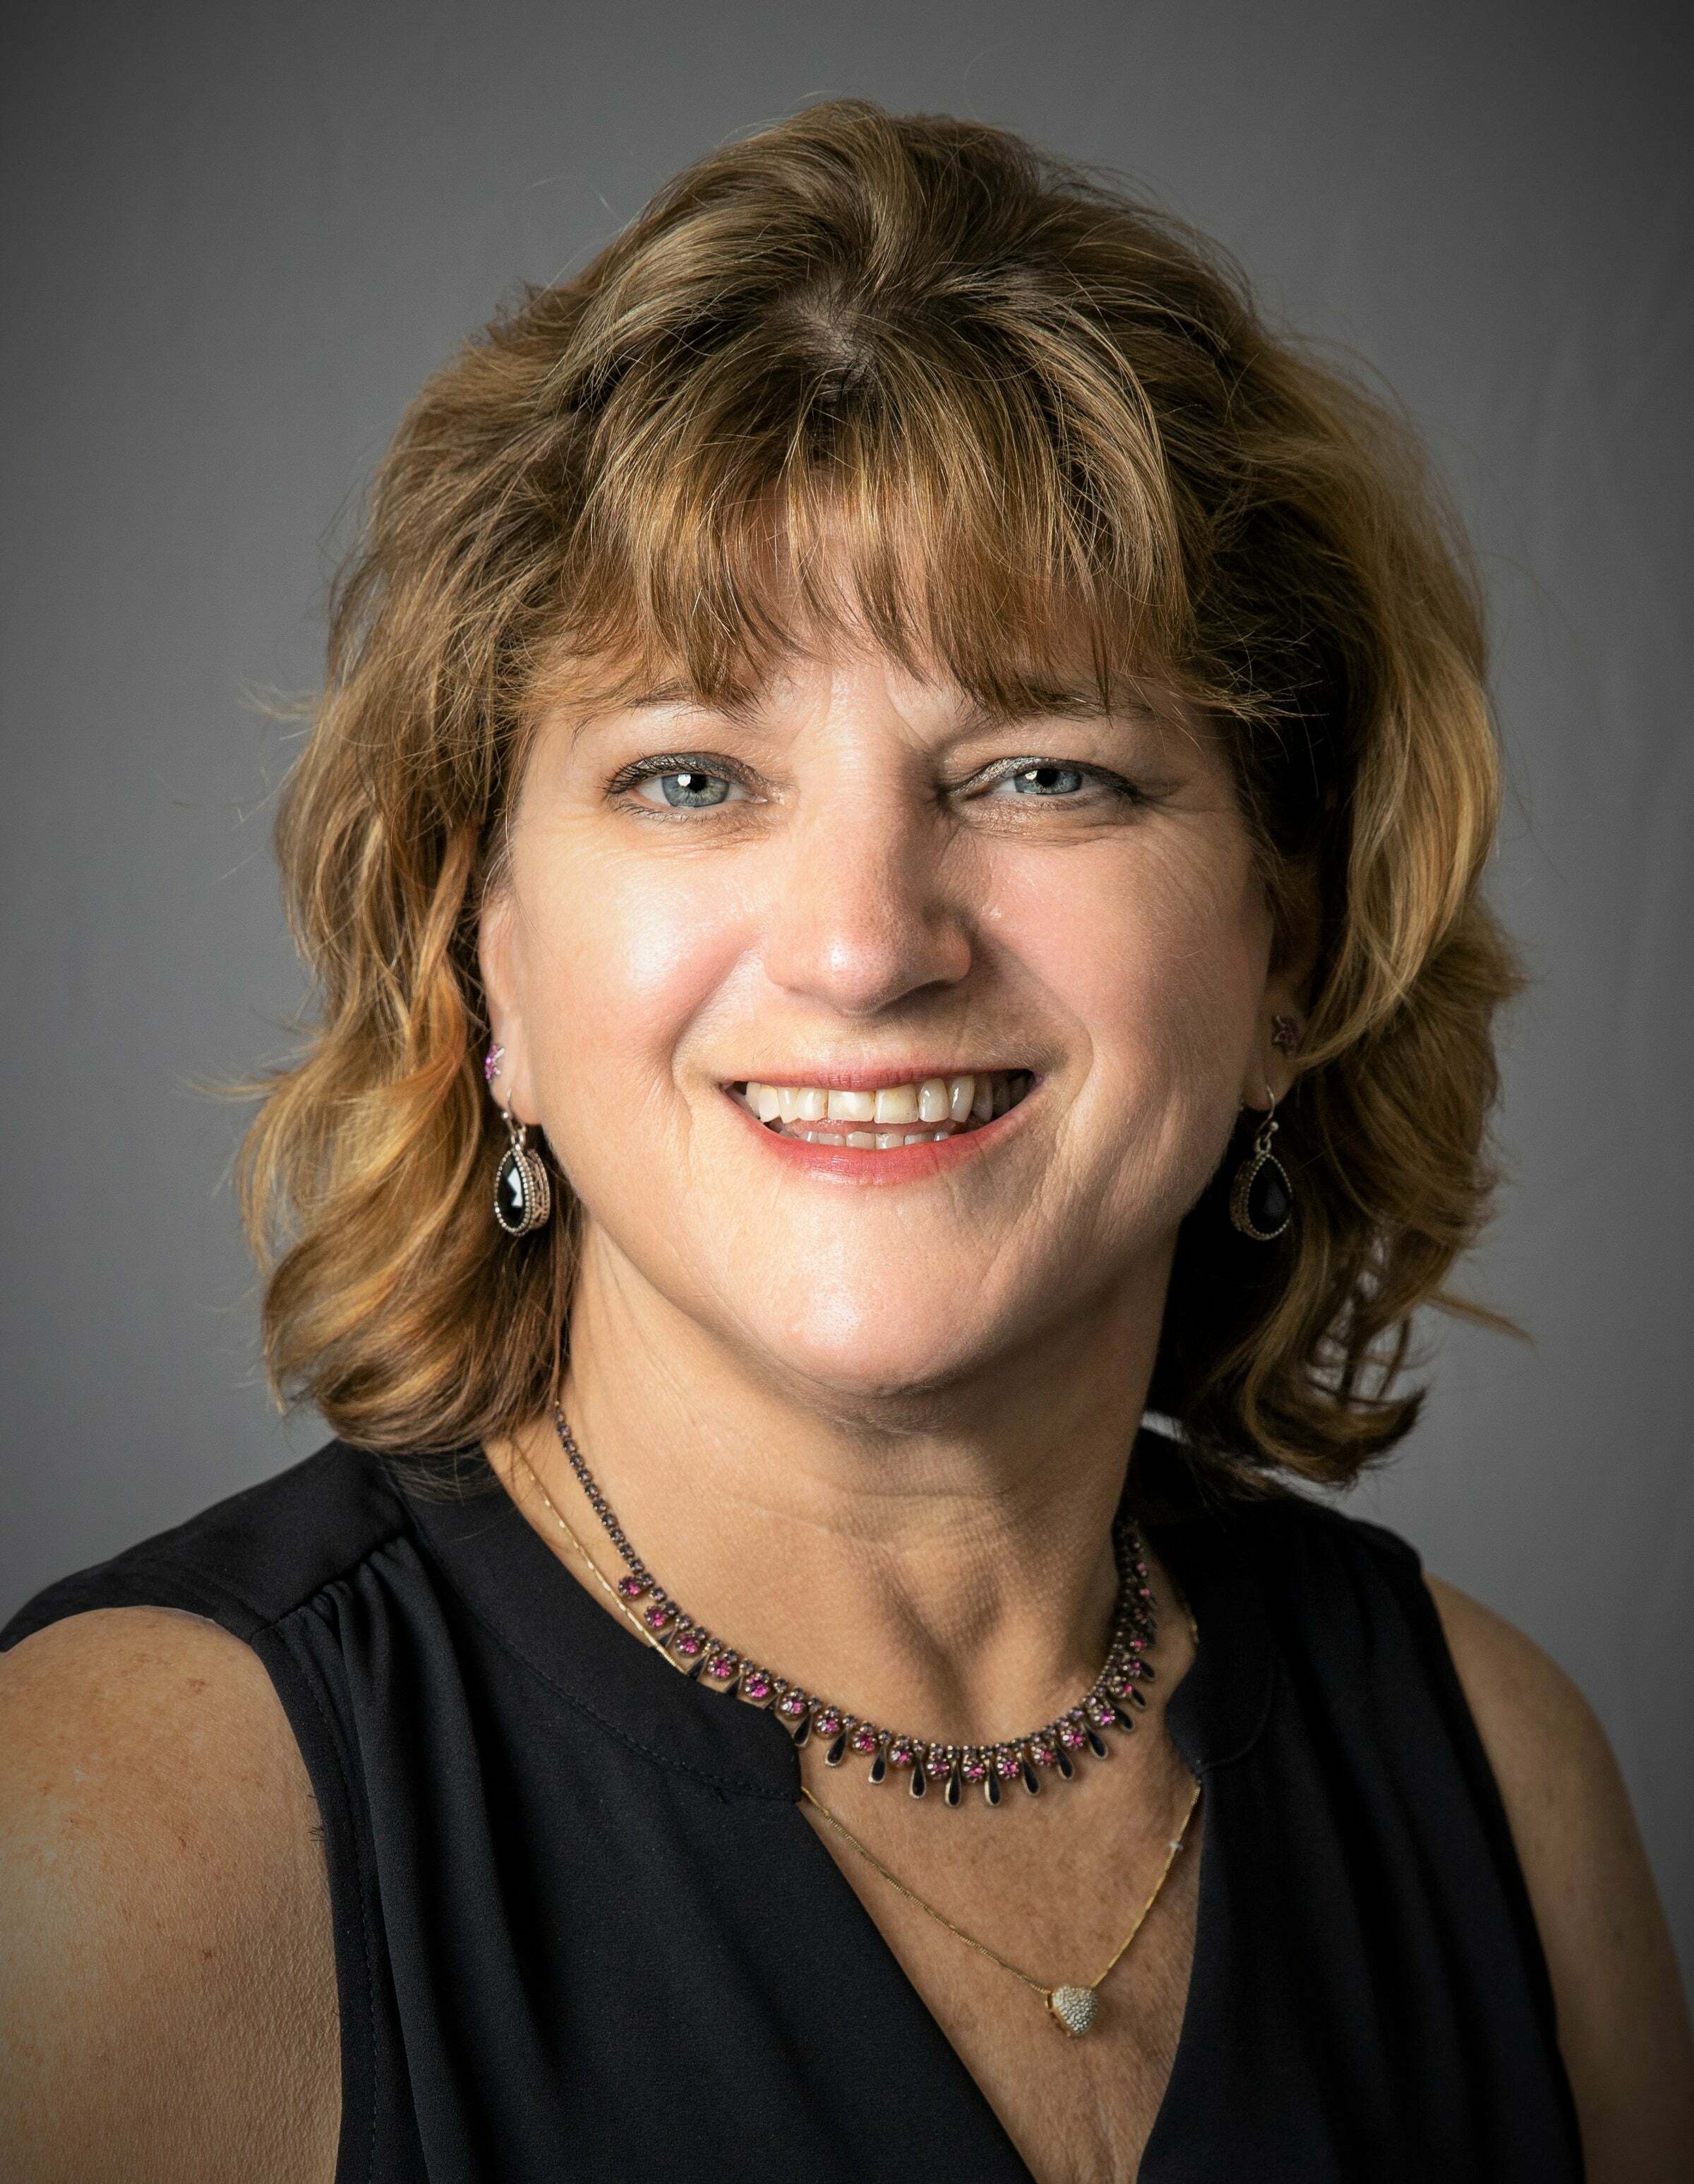 Nancy Thurnauer, Real Estate Salesperson in Manchester, ERA Blanchard & Rossetto, Inc.